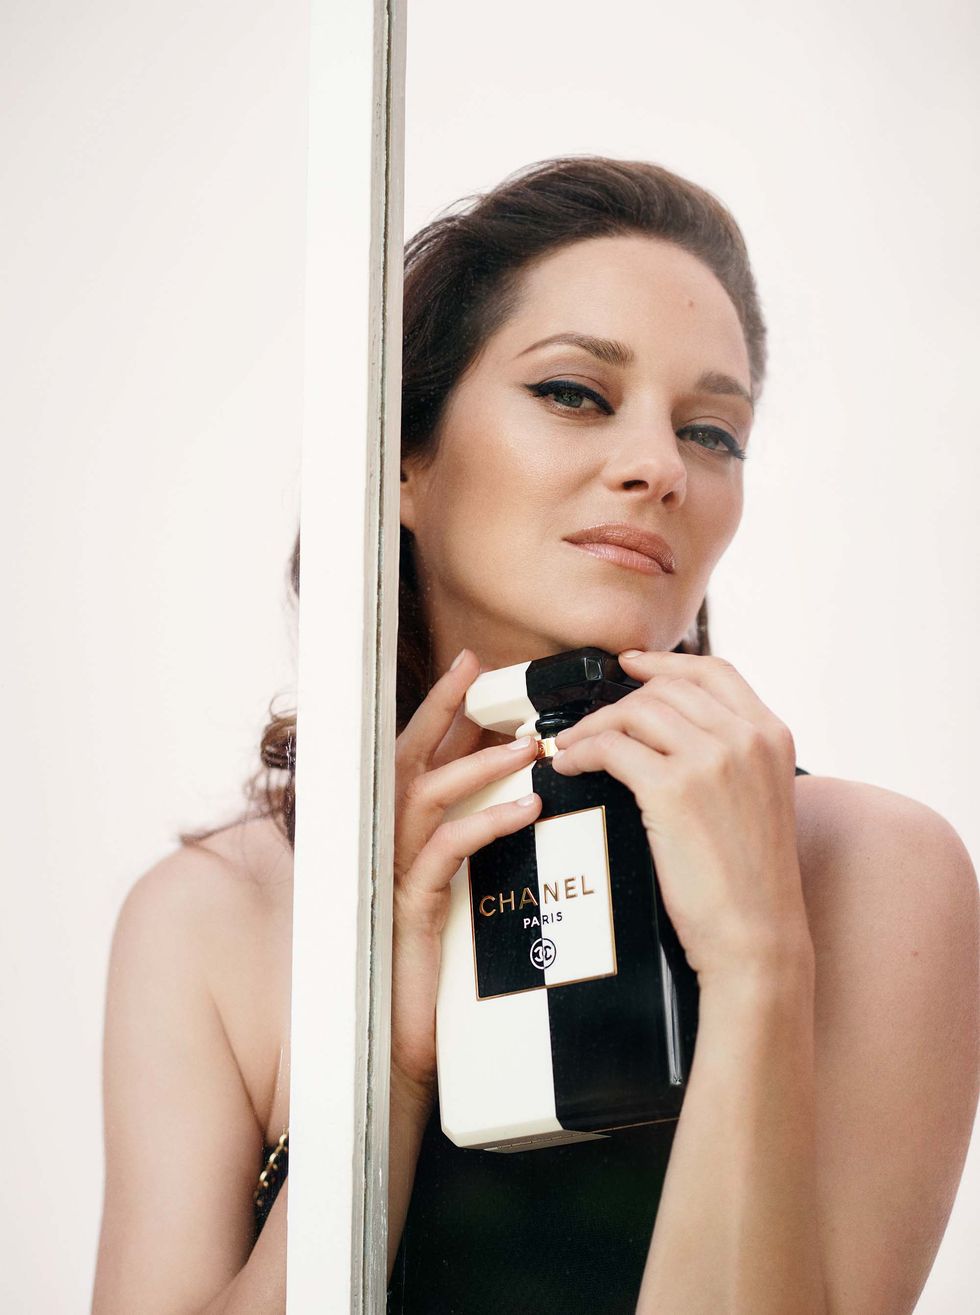 Marion Cotillard on activism, acting and what she learnt from lockdown